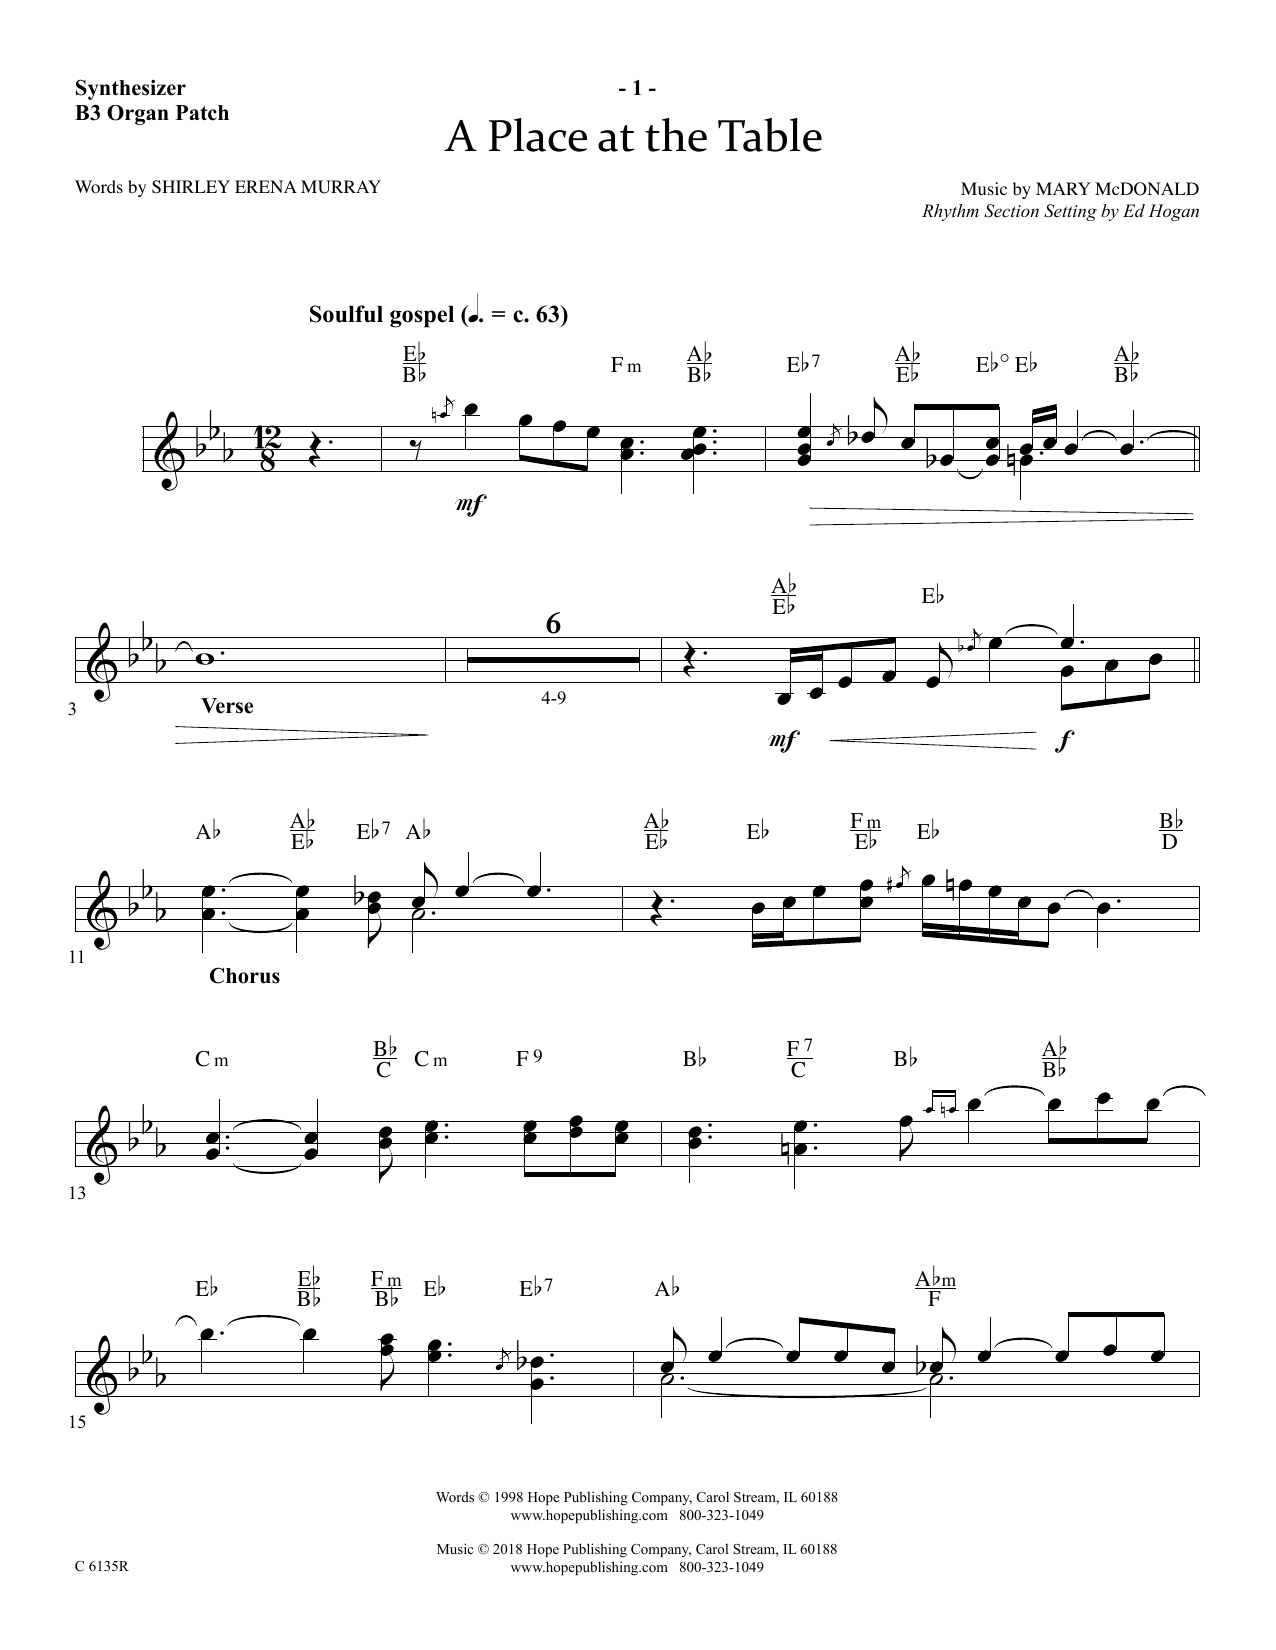 Download Ed Hogan A Place At The Table - Synthesizer Sheet Music